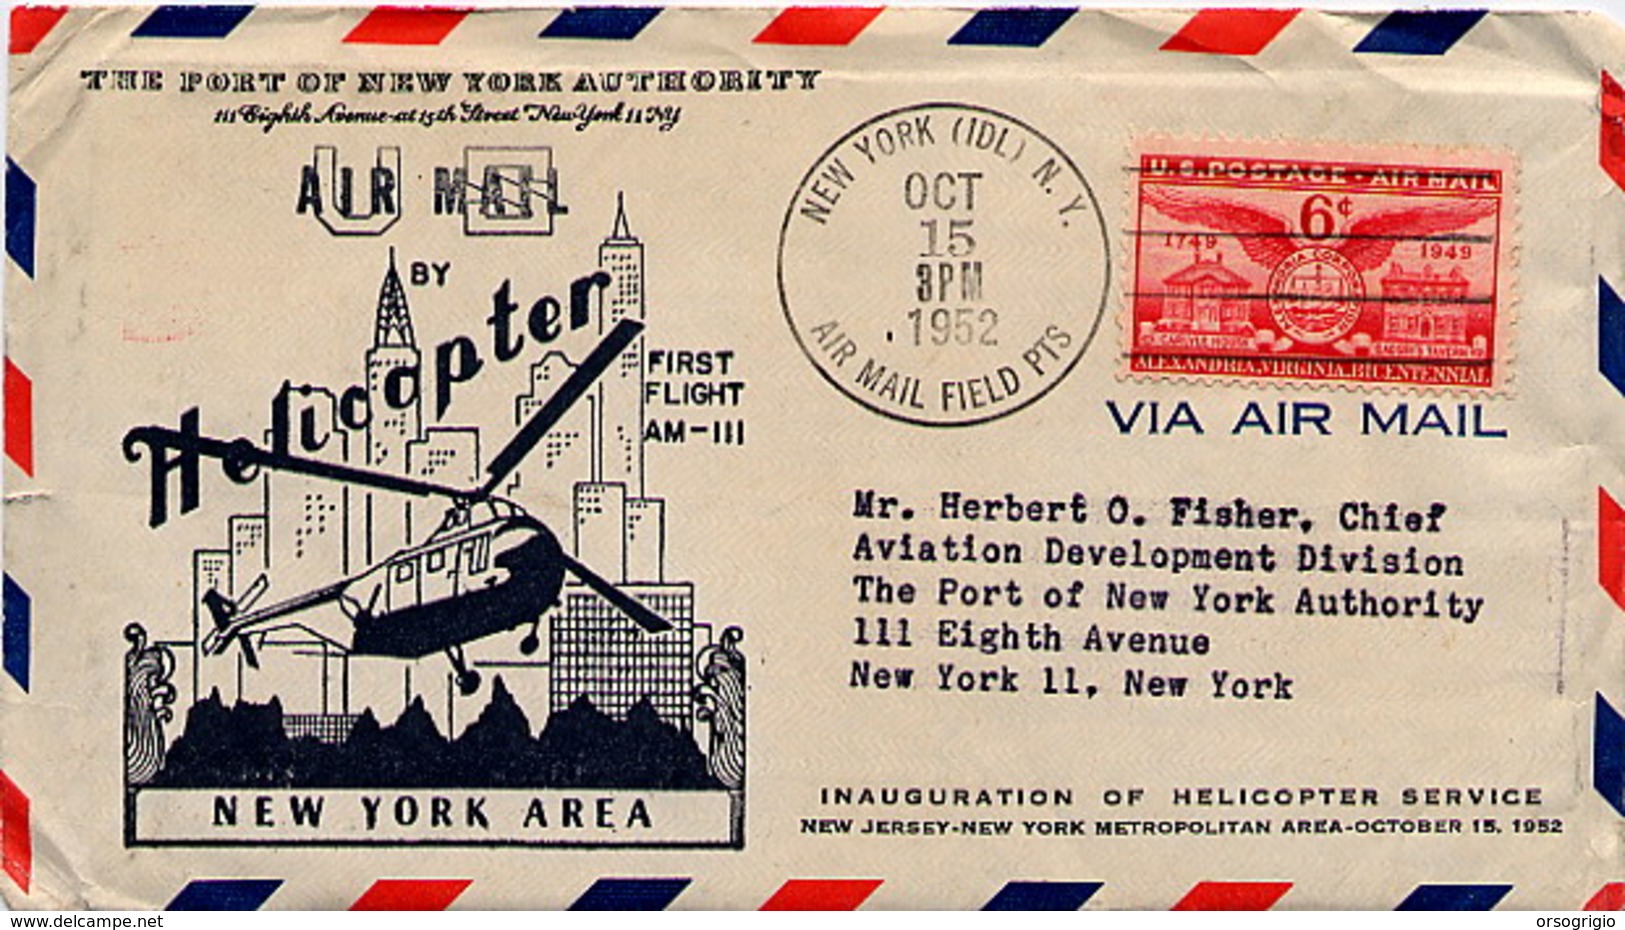 USA - The Port Of New York - AIR MAIL BY HELICOPTER - FIRST FLIGHT AM-III -  OCT 15 1952 - Elicotteri